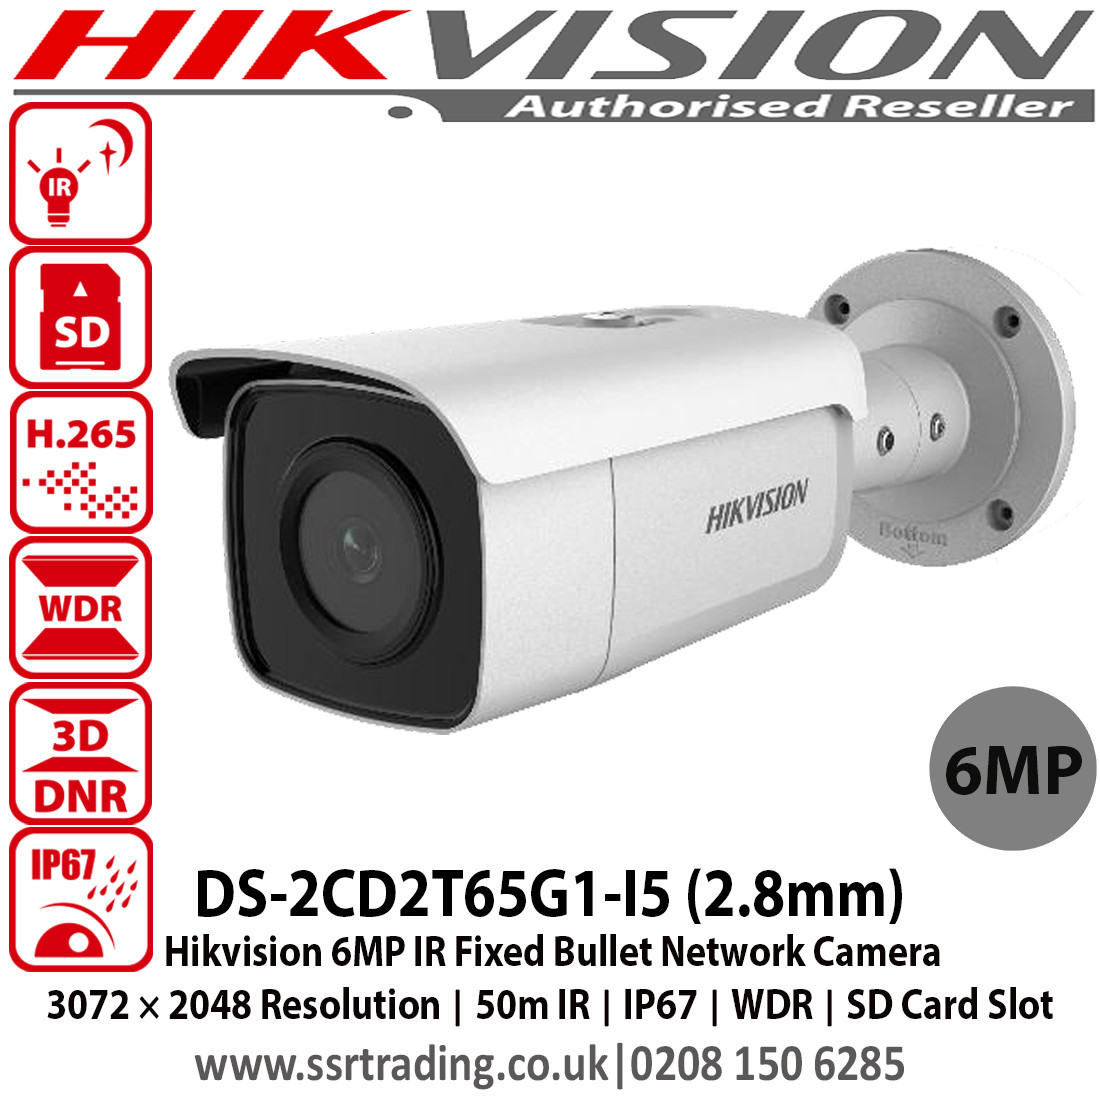 Hikvision 6MP IR Fixed Bullet Network Camera with 2.8mm fixed lens, 50m IR,  120dB WDR, Powered by Darkfighter, IP67, BLC/3D DNR/ROI/HLC, Support  on-board storage, up to 128 GB - DS-2CD2T65G1-I5 (HIKIPCD6403')